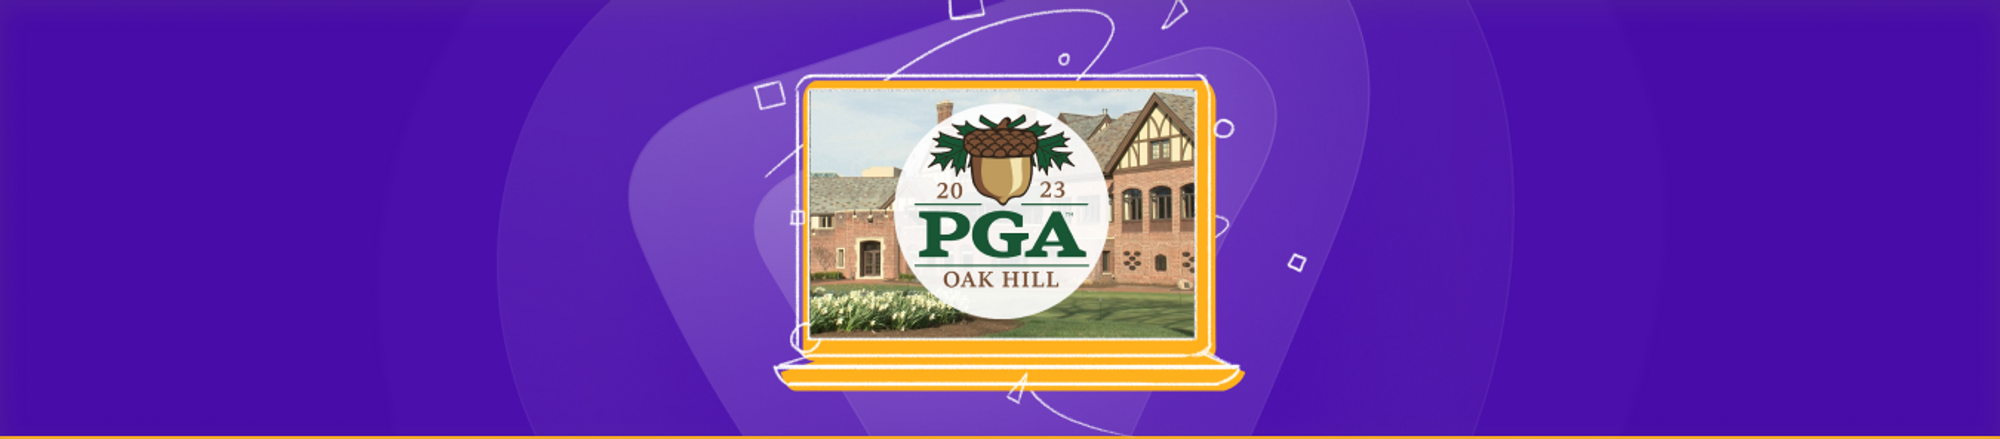 How to Watch PGA Championship Live Stream from Anywhere